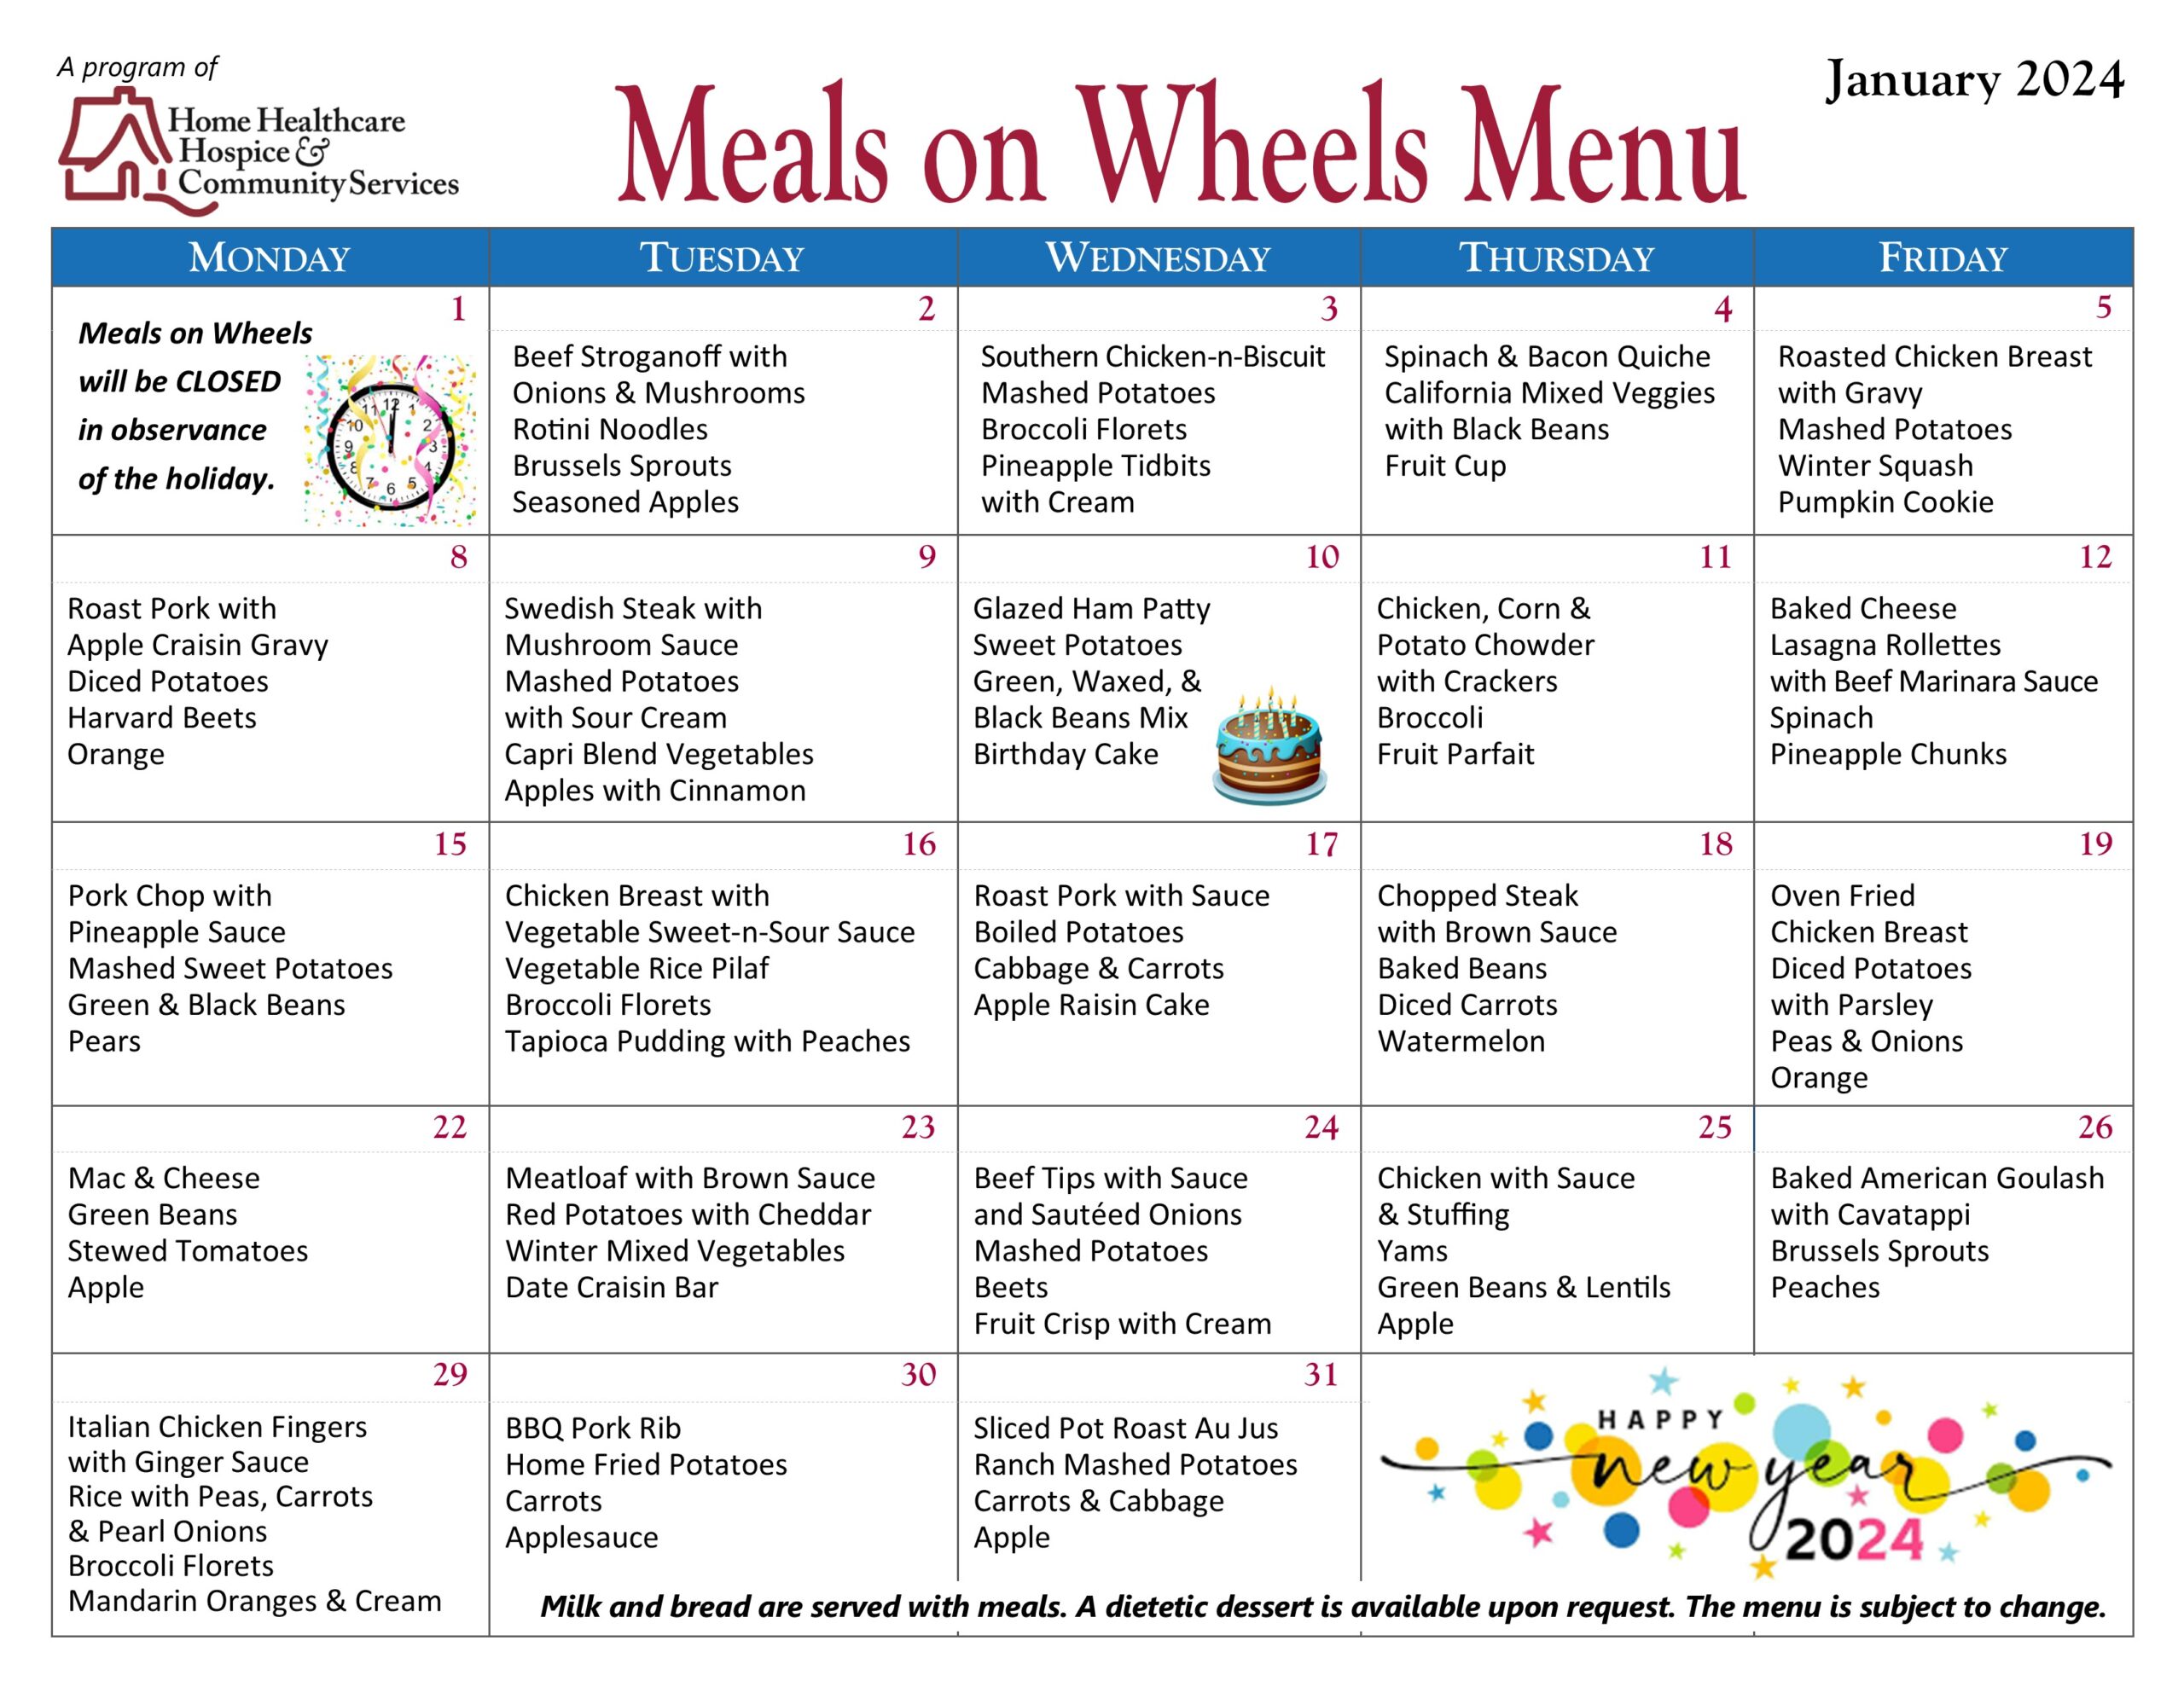 Meals On Wheels Menu for January 2024